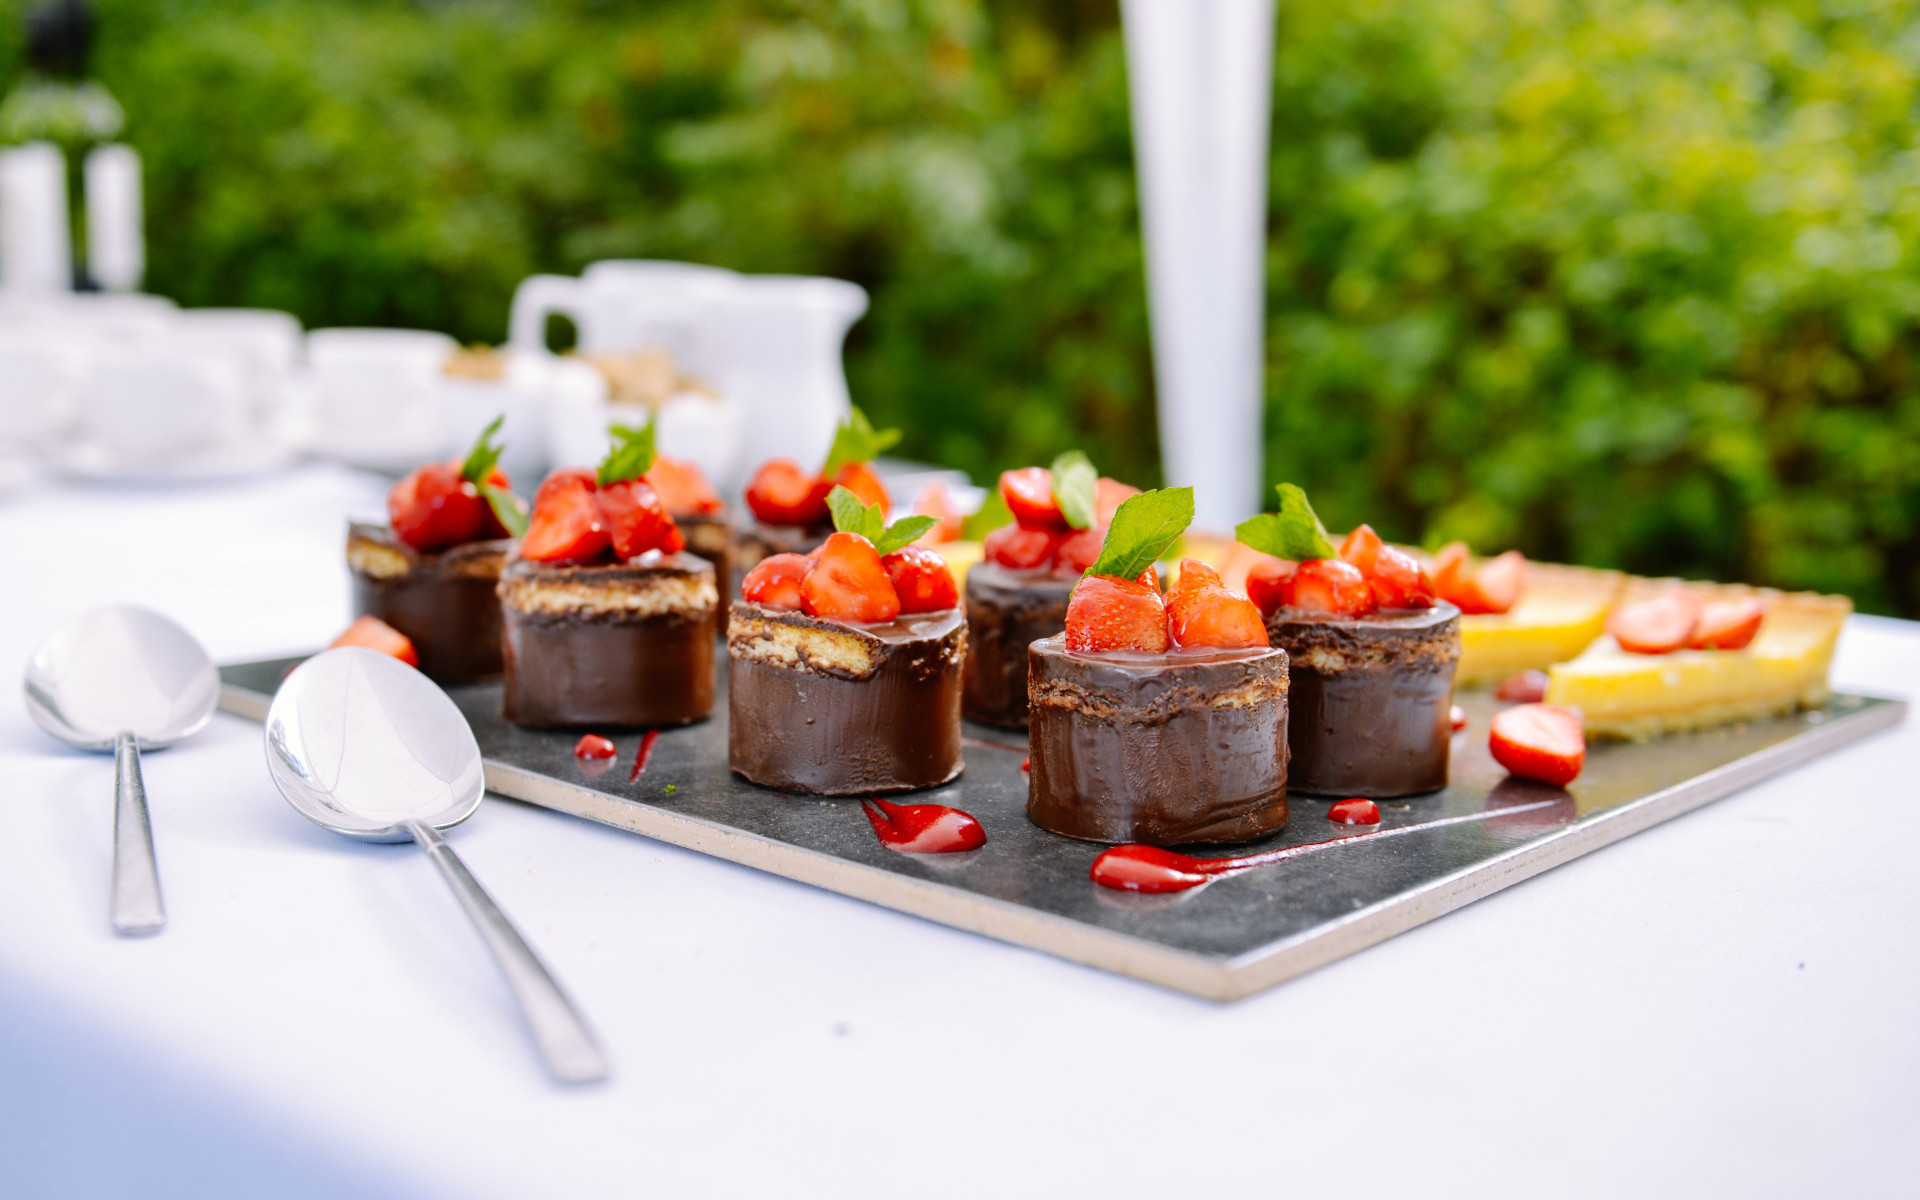 Chocolate cakes with strawberries wallpaper 1920x1200